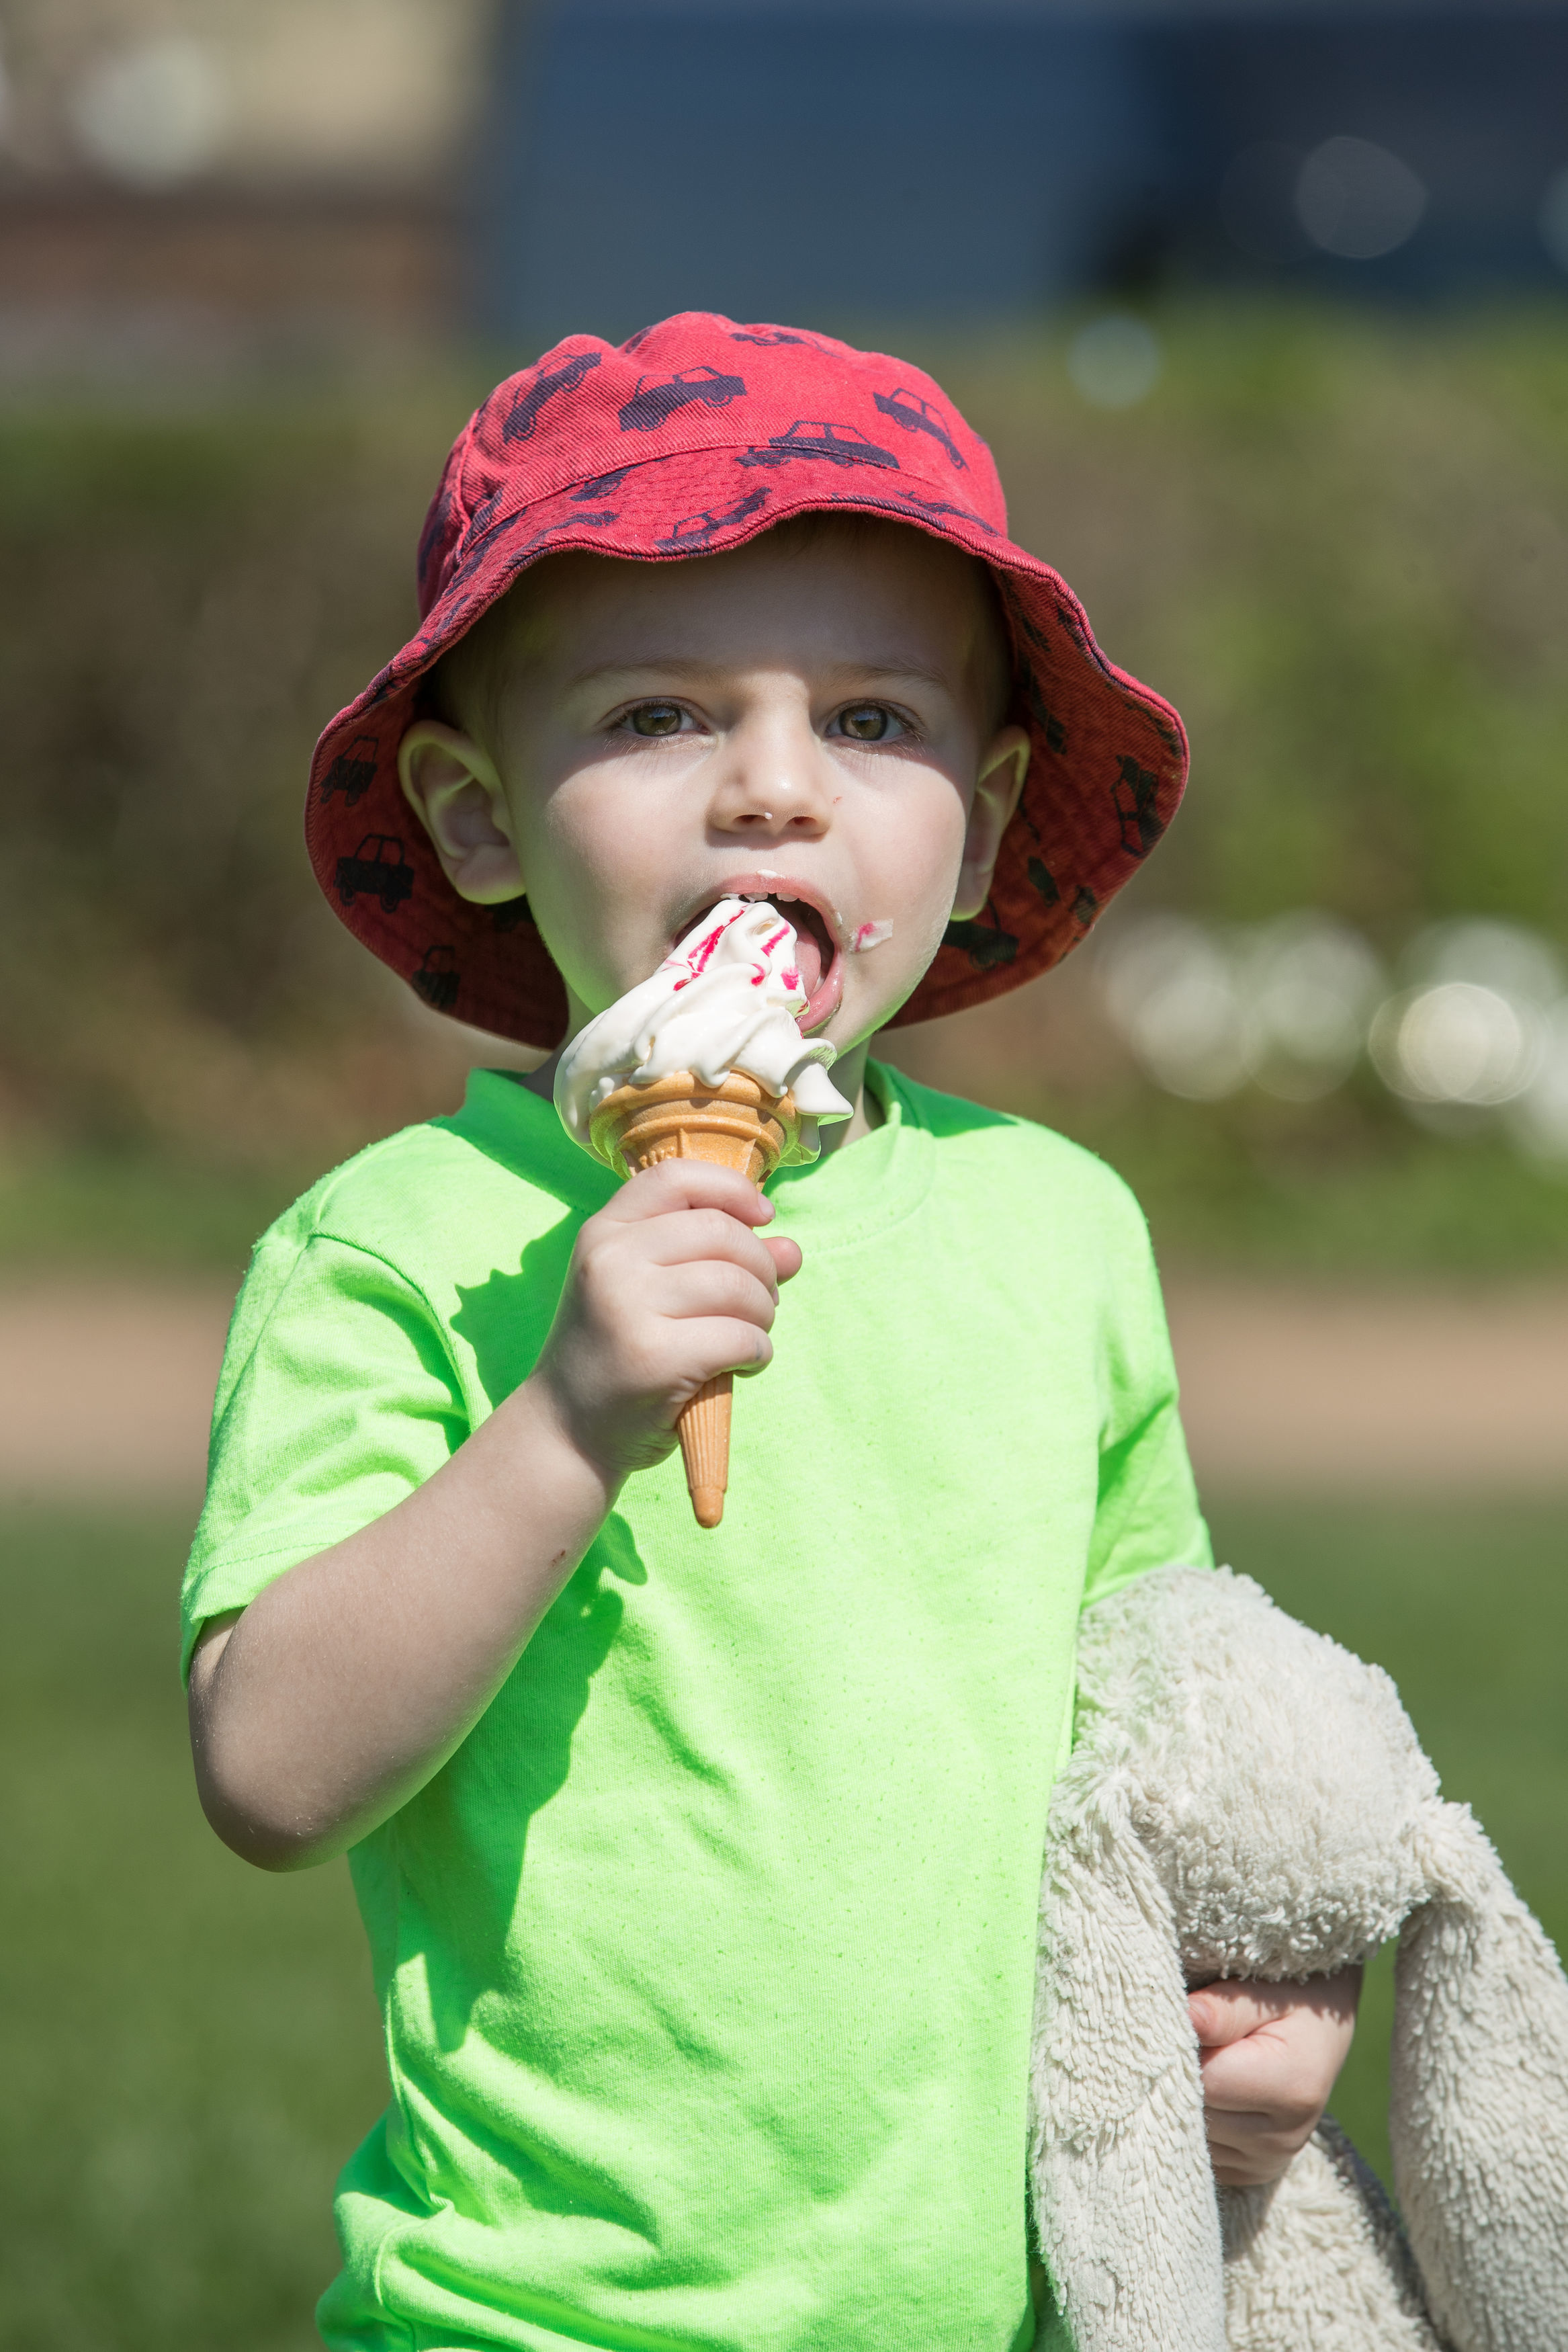 Perfect weather for ice cream: Three-year-old Jayden Lynch enjoys a refreshing treat (Aaron Chown/PA)